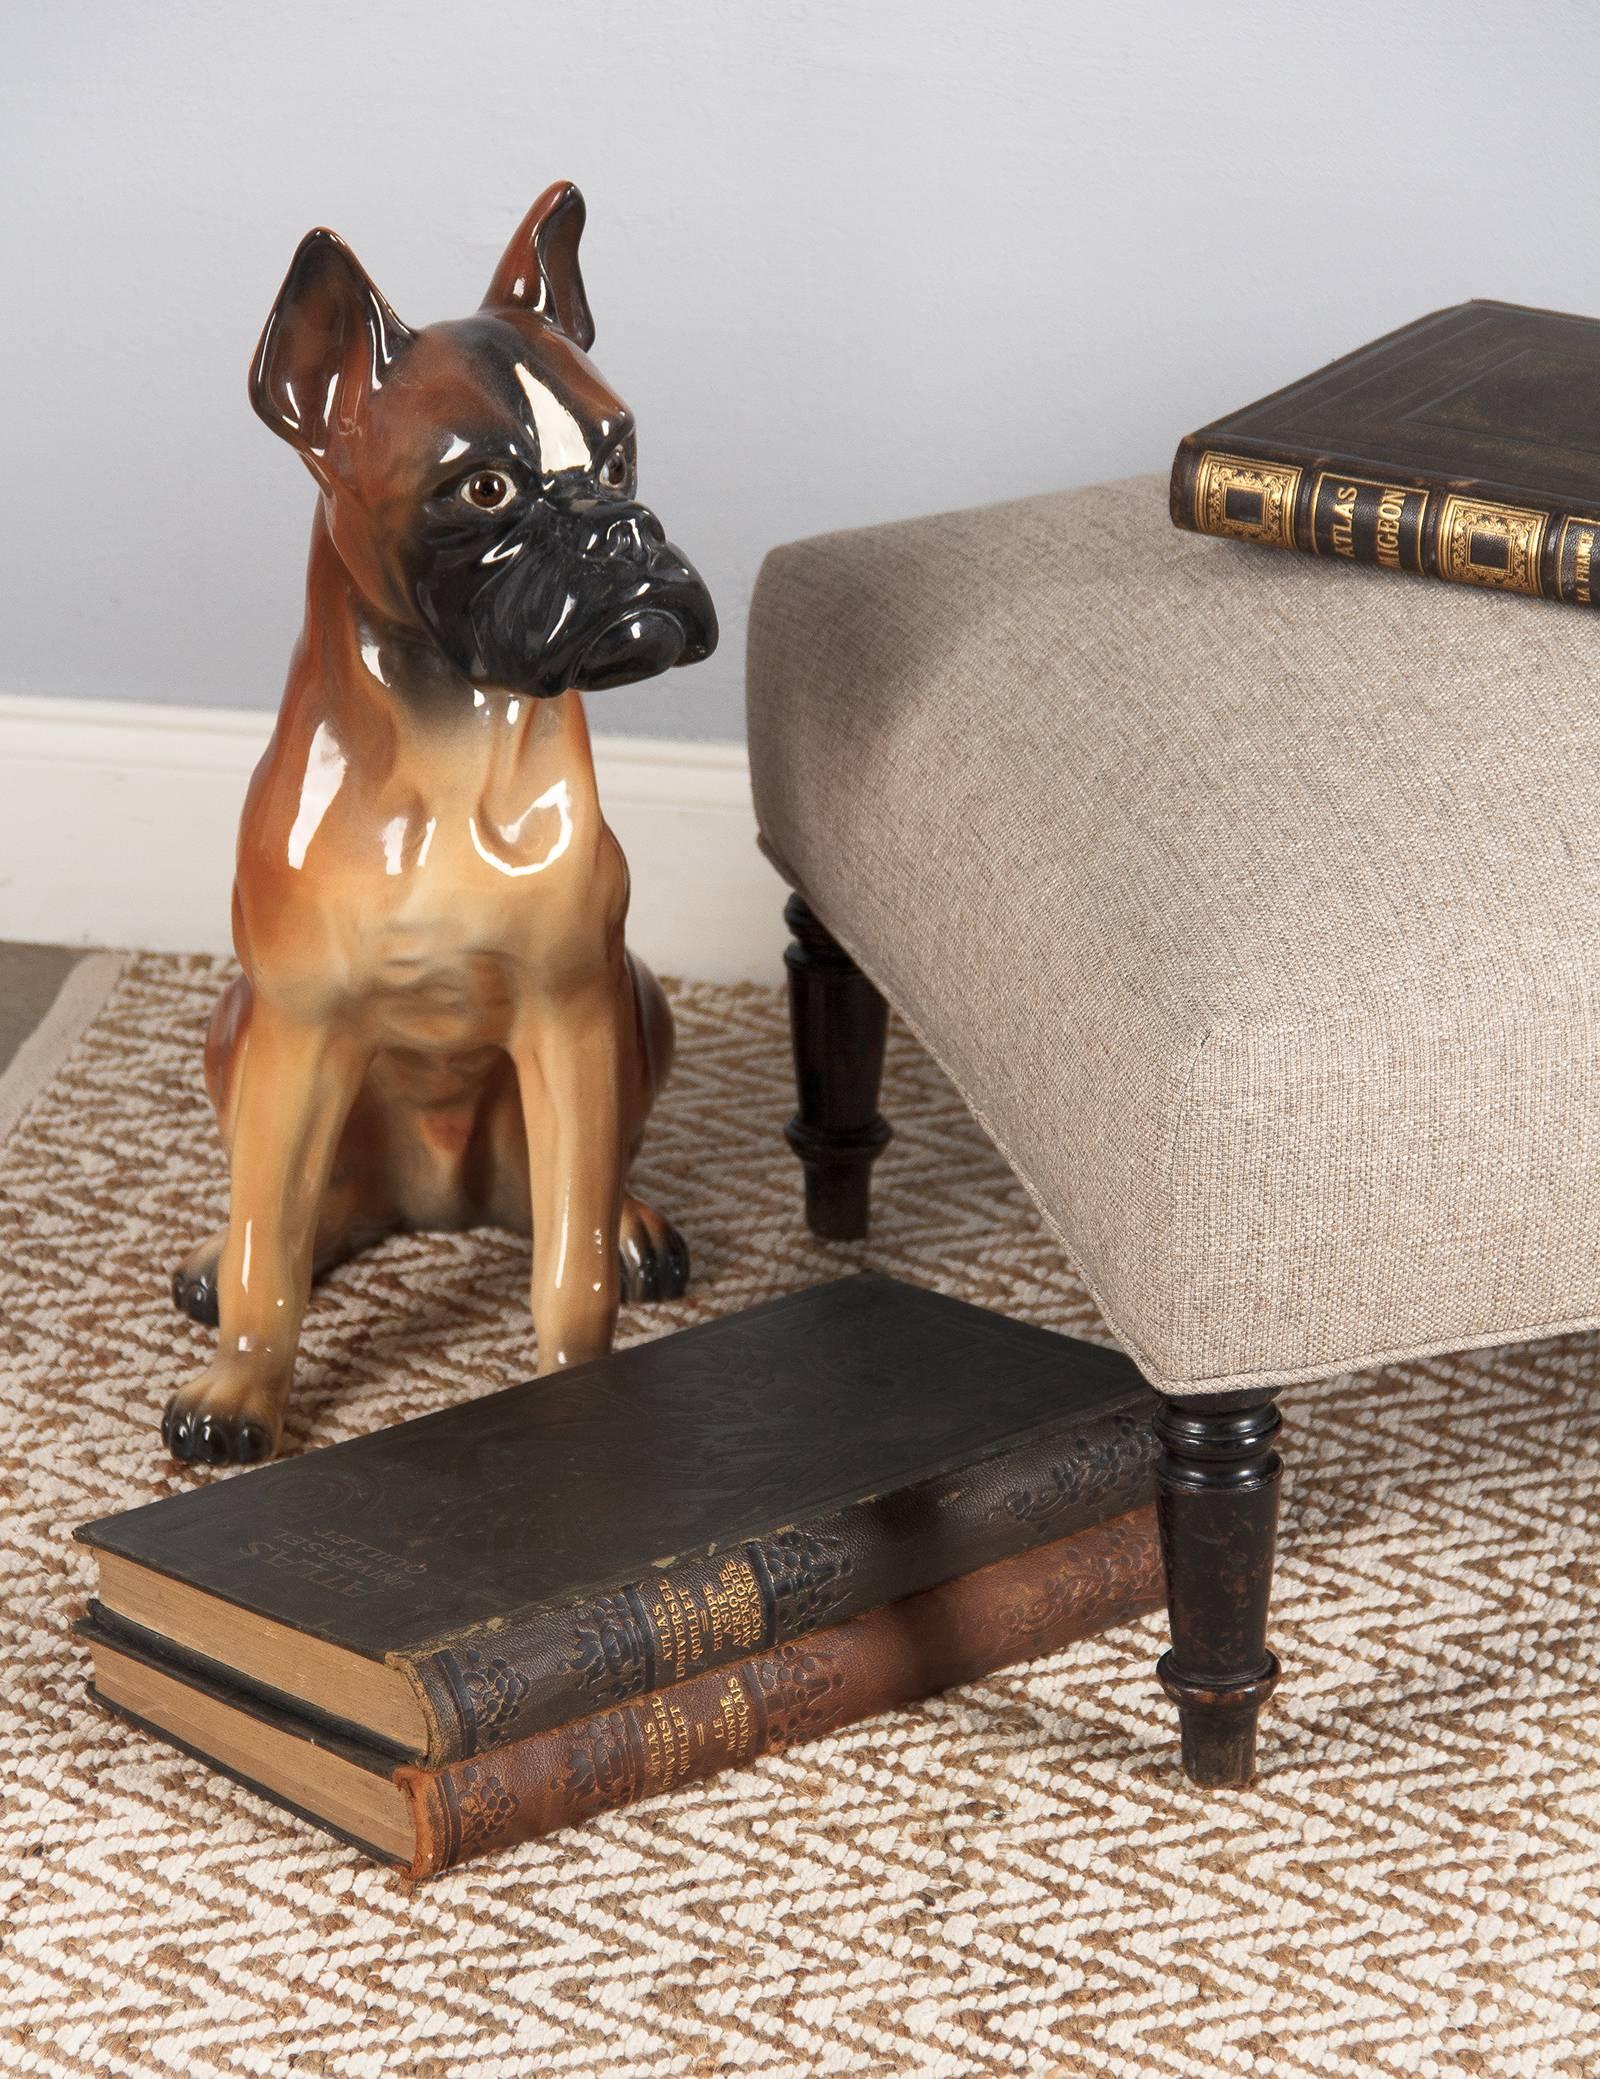 A large and comfortable square Napoleon III period ottoman with turned legs in ebonized pear wood. Newly re-upholstered in a light grey textured fabric. The perfect footrest or step up to the bed for your favourite dog!